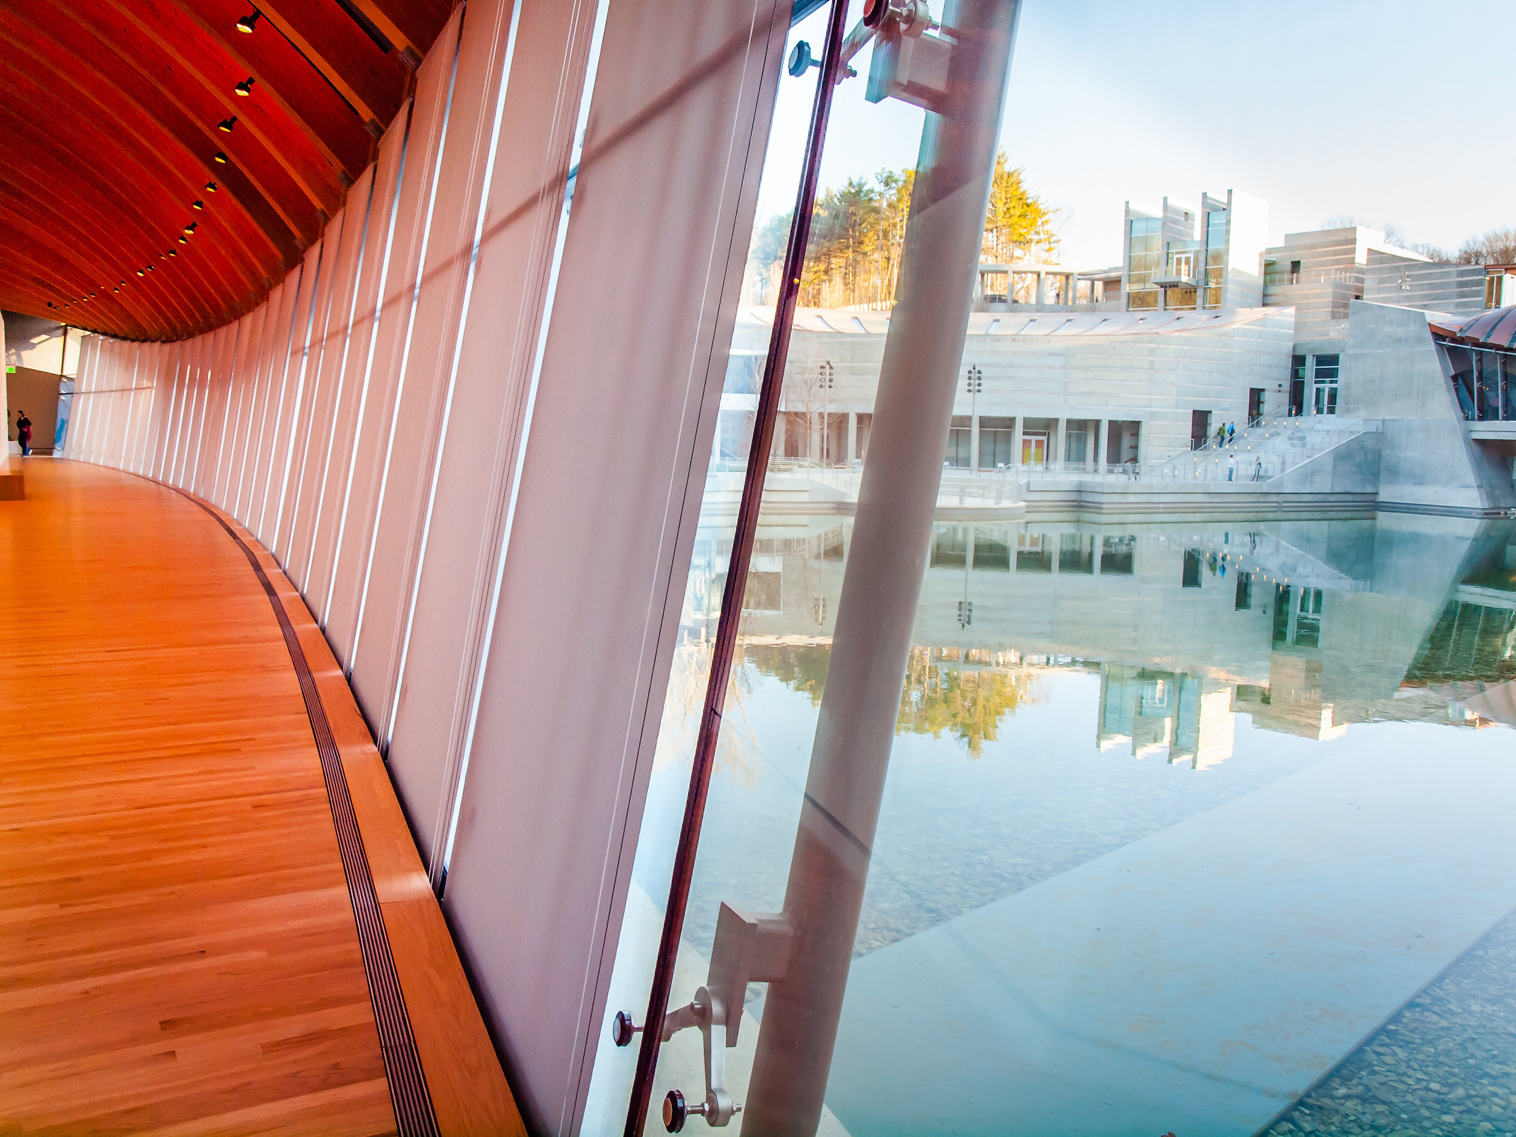 Moshe Safdie's design at the Crystal Bridges Museum of Modern Art included a connectedness to the surrounding nature, which required an equally distinctive design of solar control systems by Hunter Douglas.